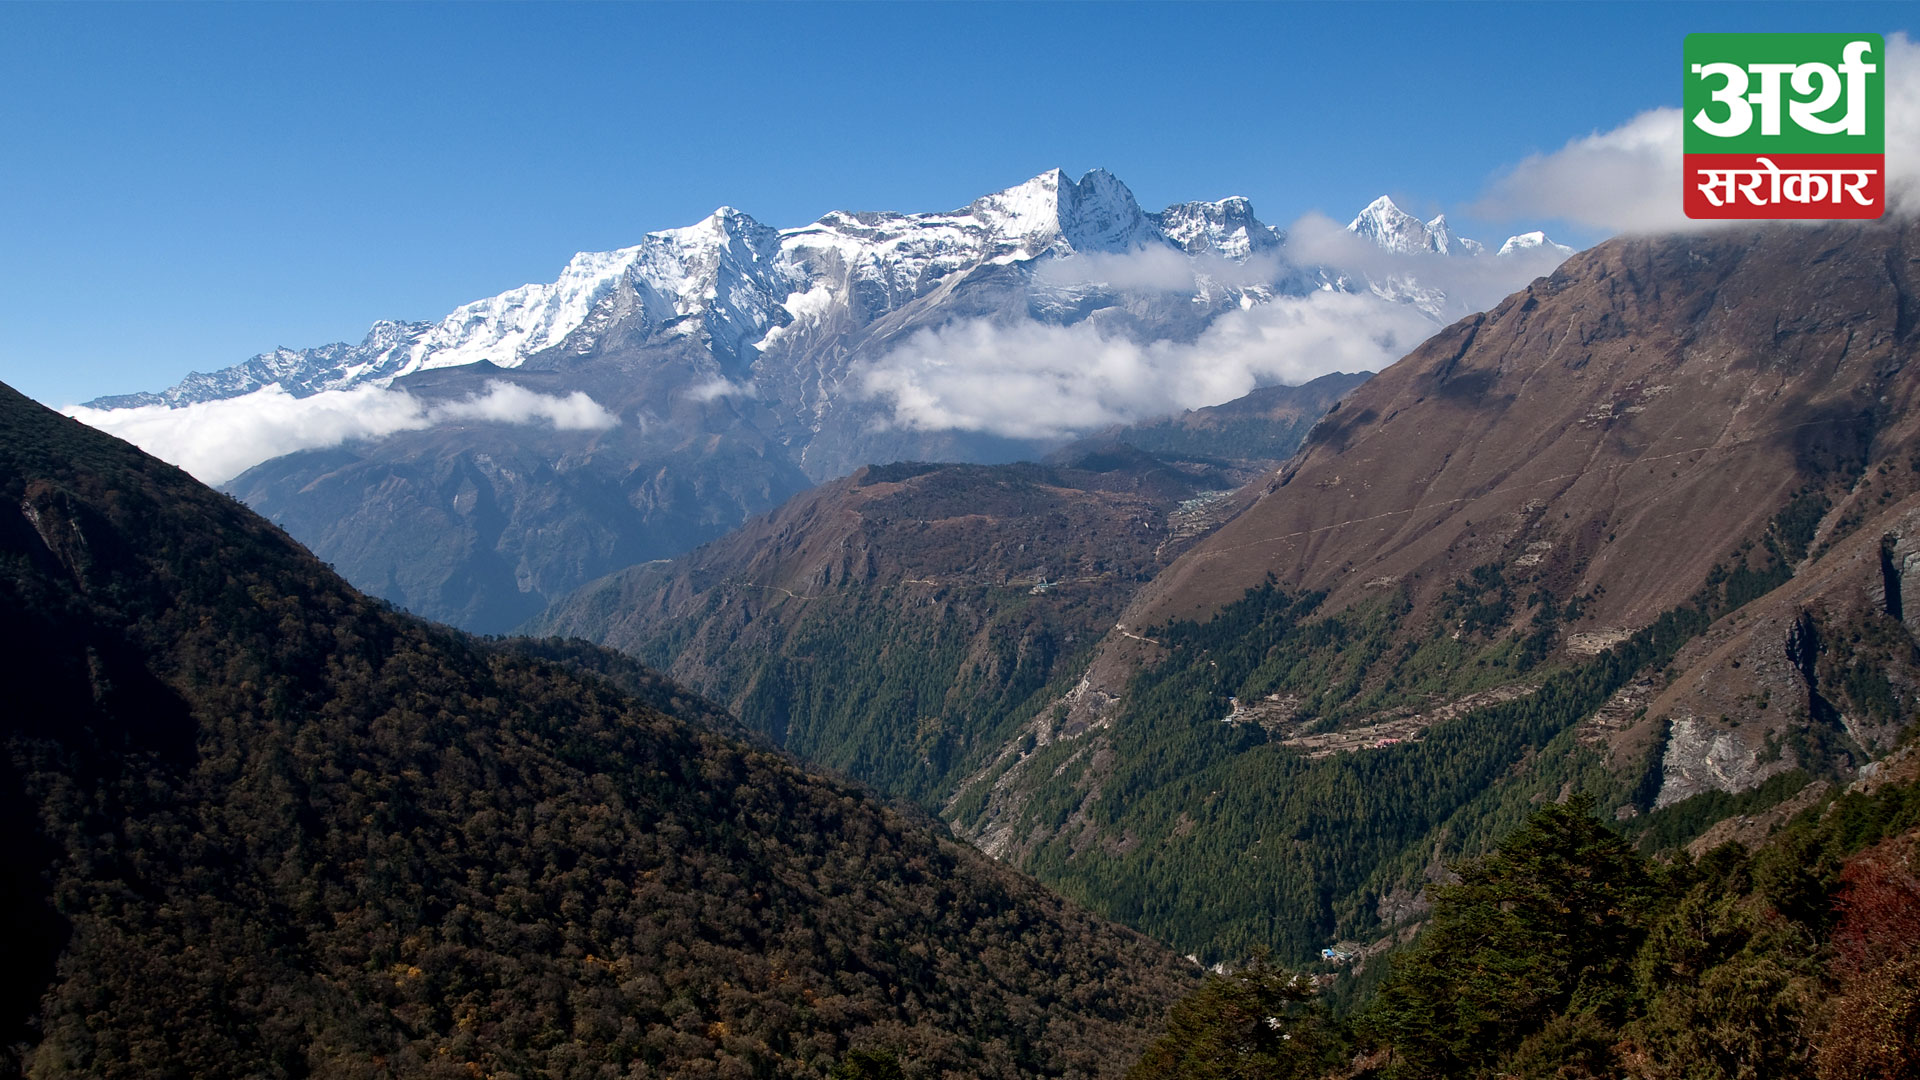 Revenue collection at Sagarmatha National Park is up by over 10 percent